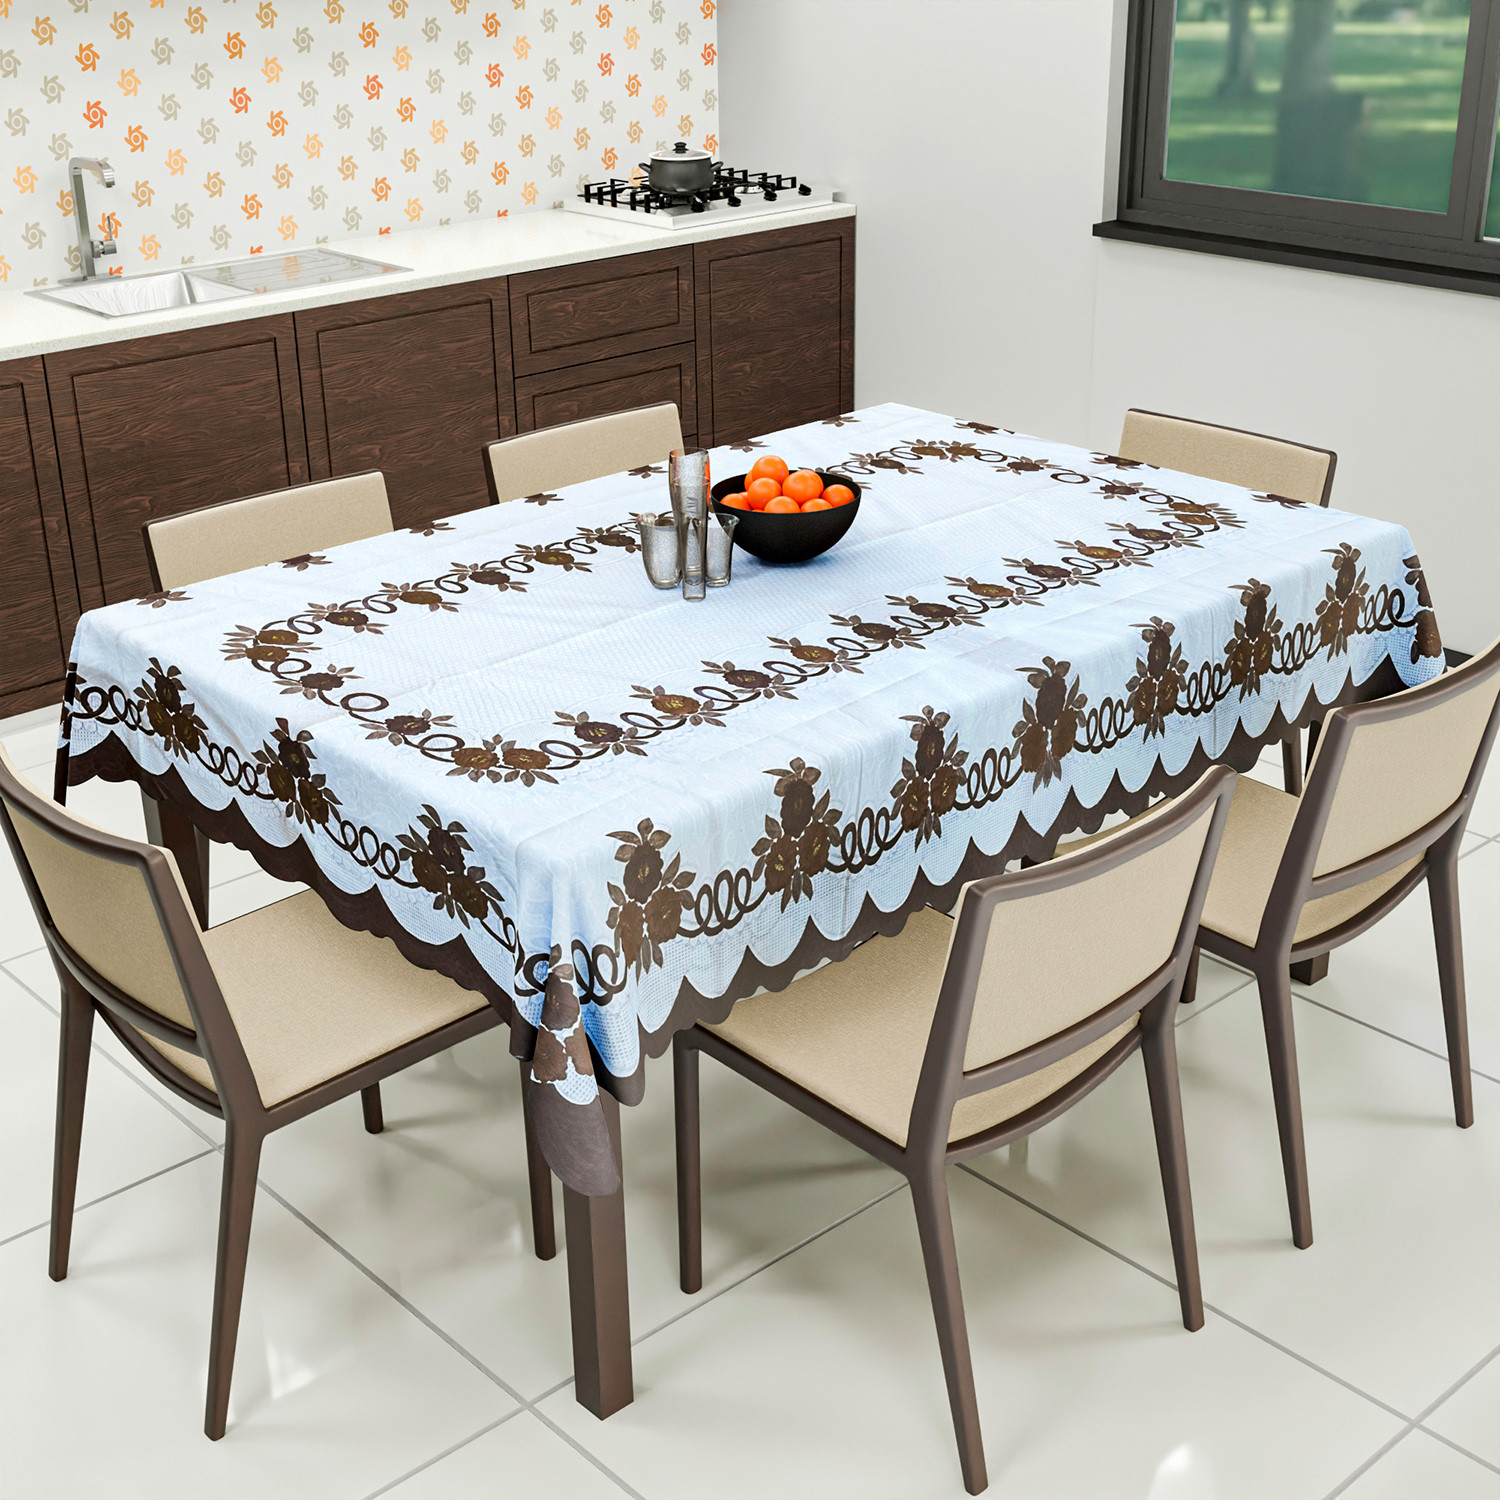 Kuber Industries Cotton Floral Print Waterproof Attractive Dining Table Cover|Tablecloth for Home Decorative, 60x90 Inch (White Brown)